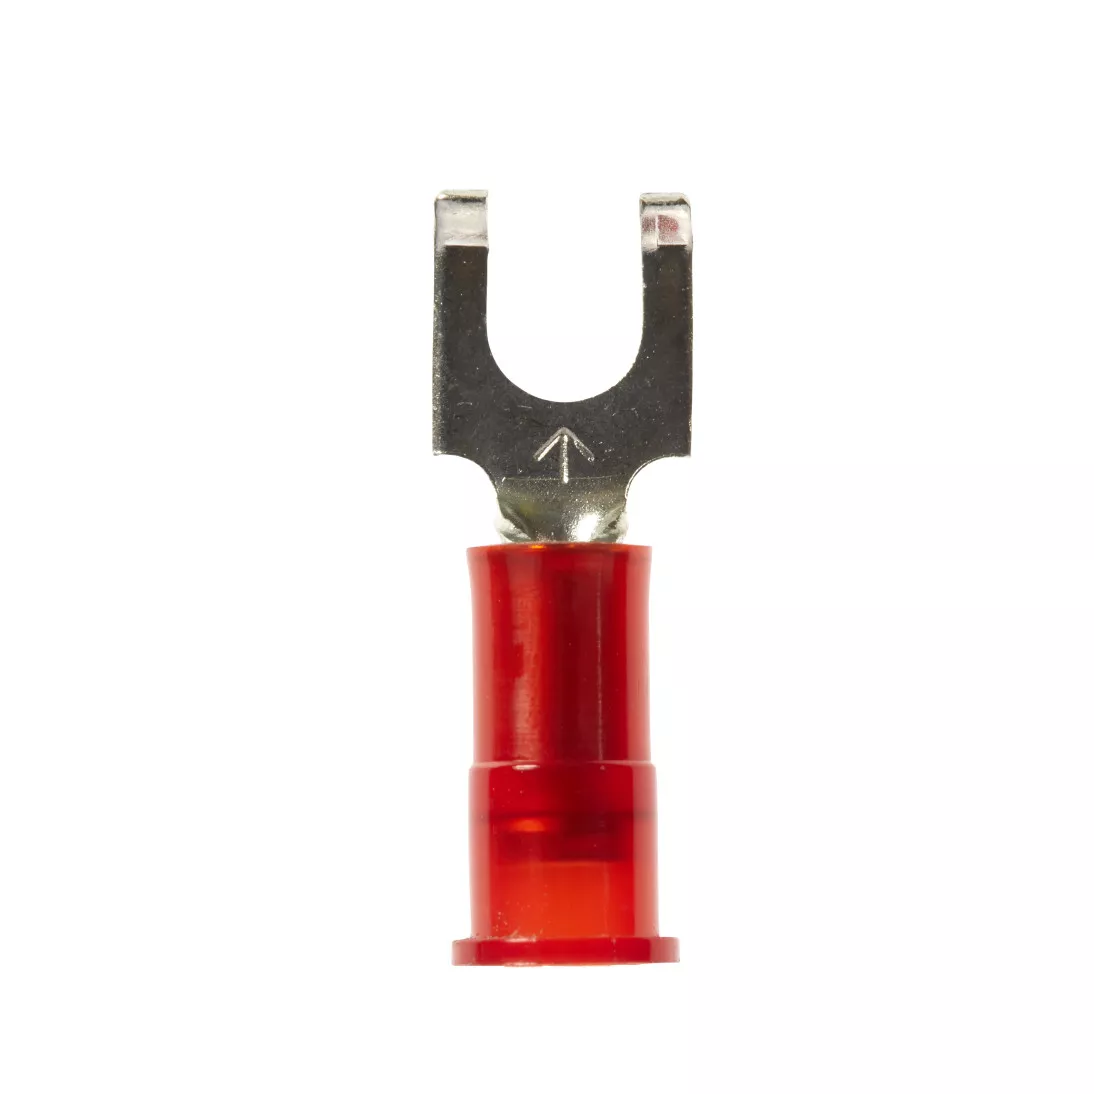 3M™ Scotchlok™ Flanged Block Fork Nylon Insulated, 100/bottle,
MNG18-8FFBX, suitable for use in a terminal block, 500/Case